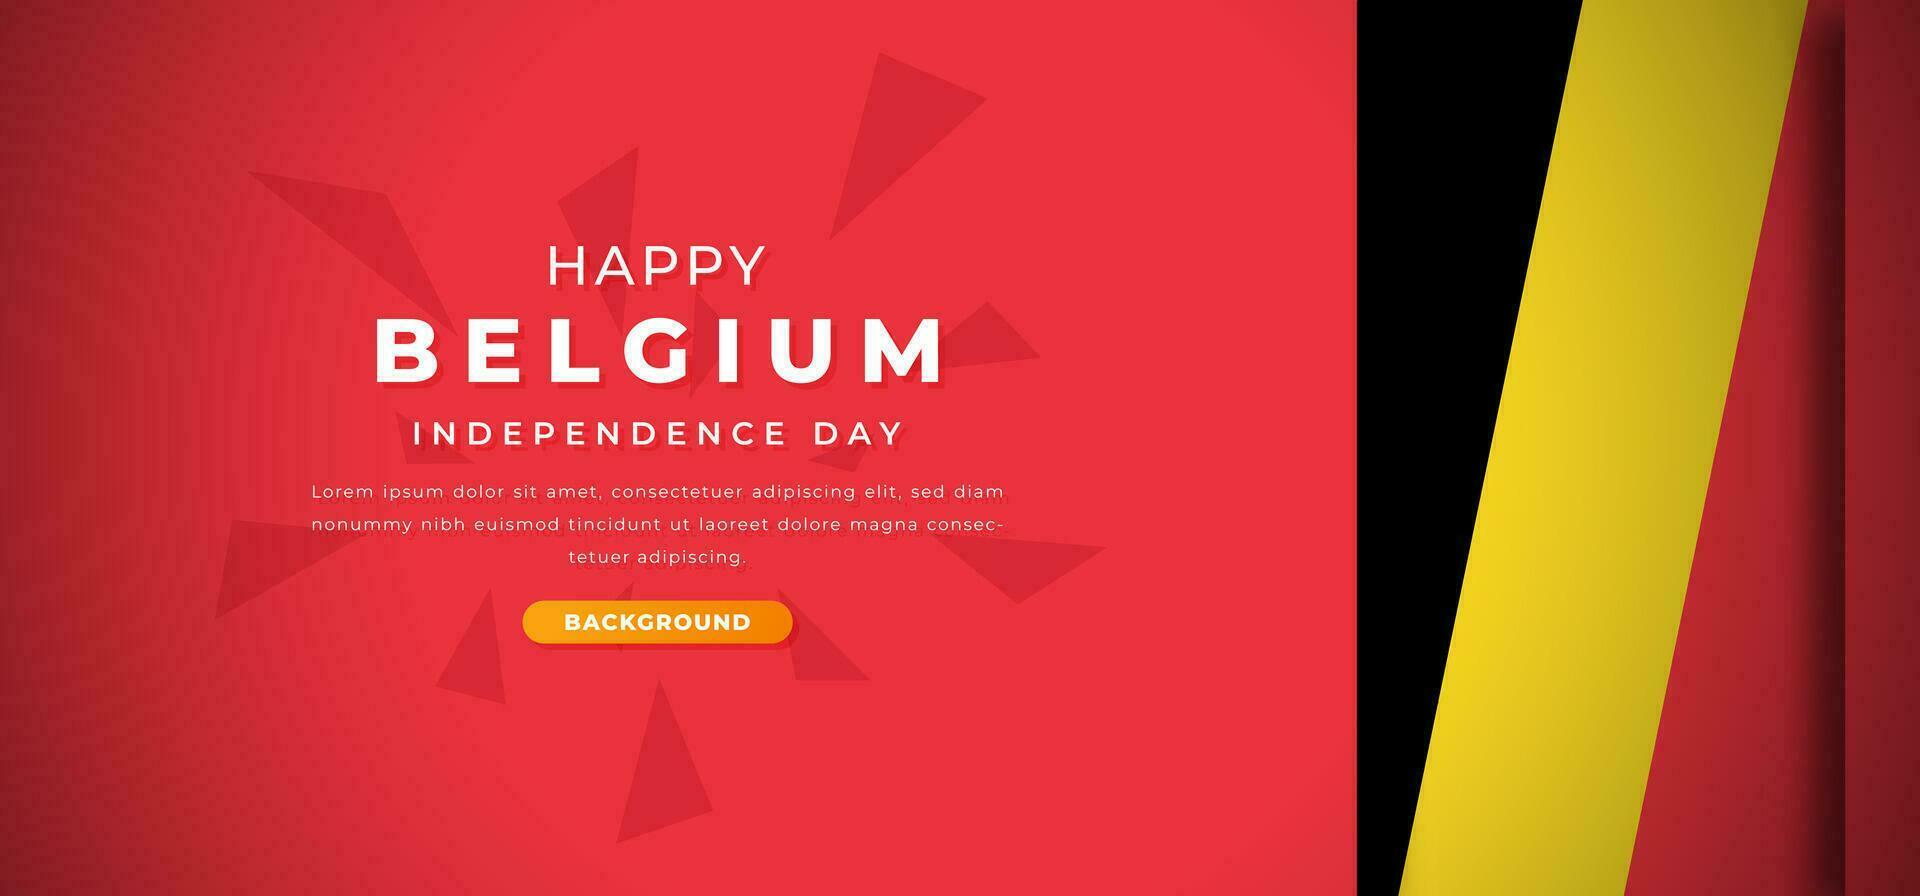 Happy Belgium Independence Day Design Paper Cut Shapes Background Illustration for Poster, Banner, Advertising, Greeting Card vector